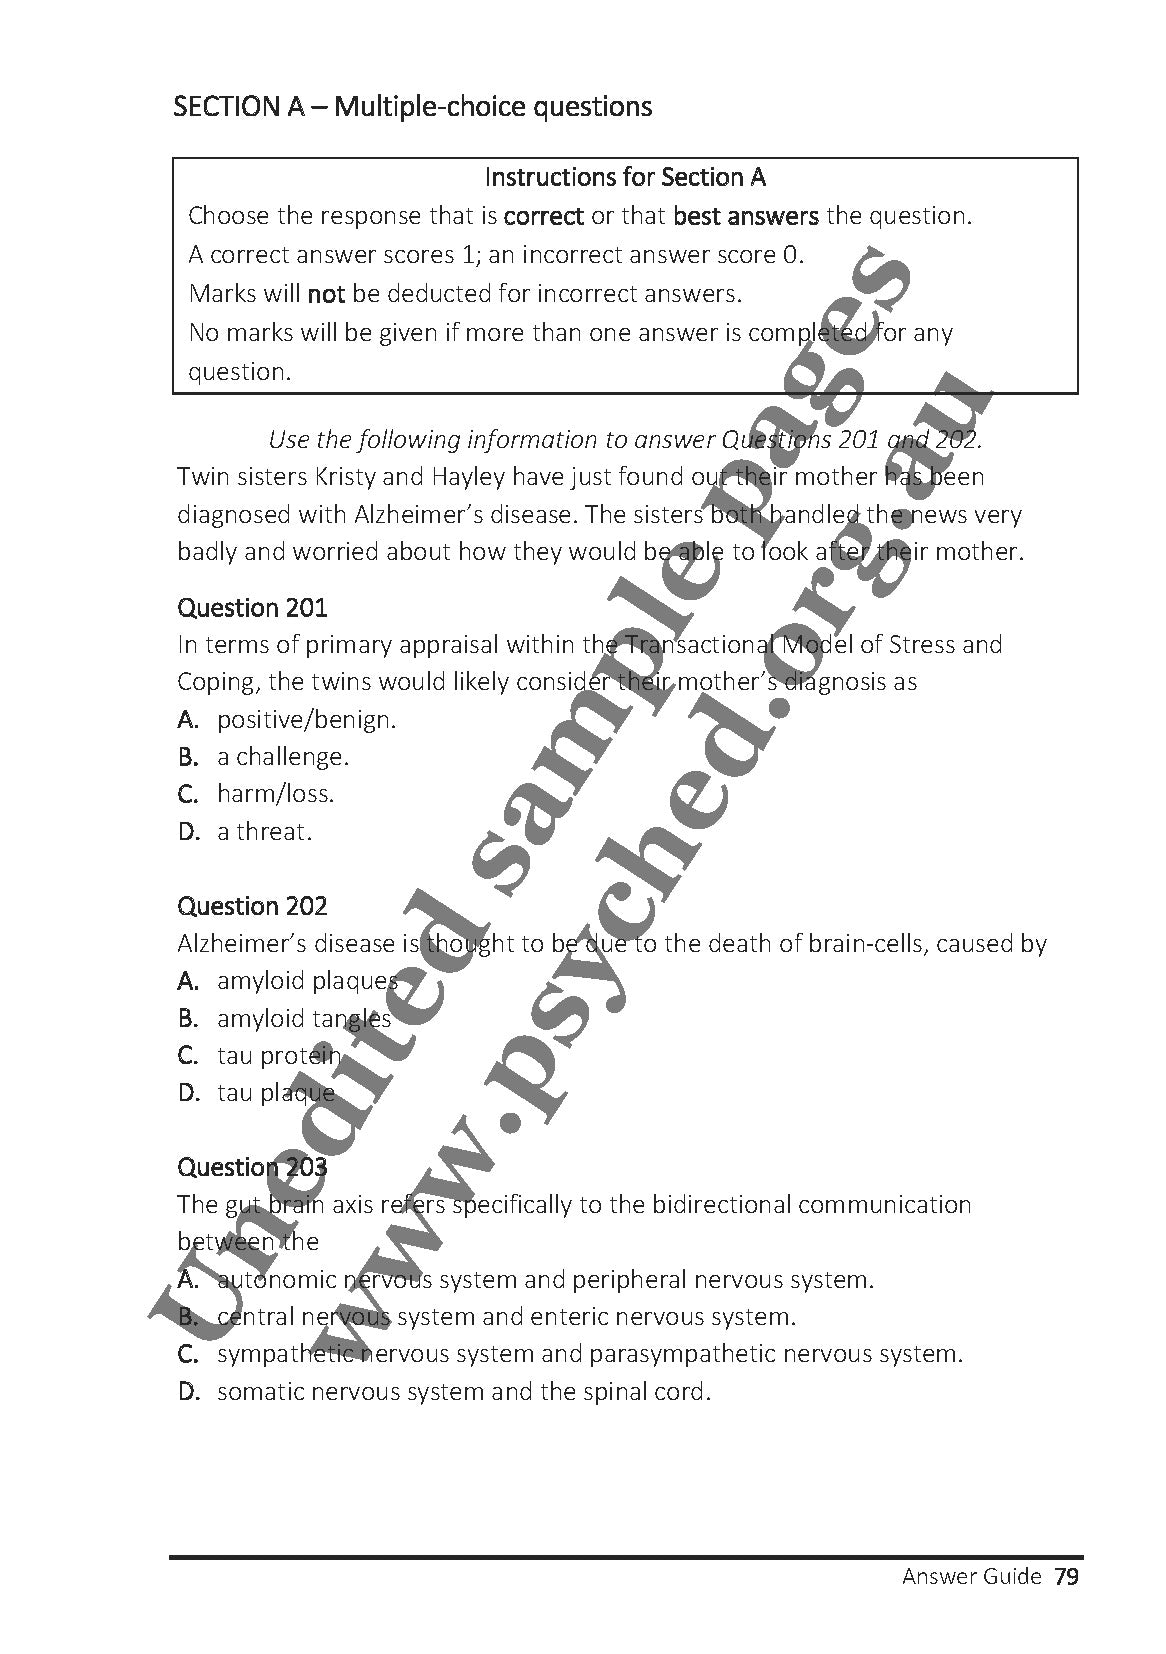 Psyched Revision Questions Book - Unit 3 Psychology Edition 1